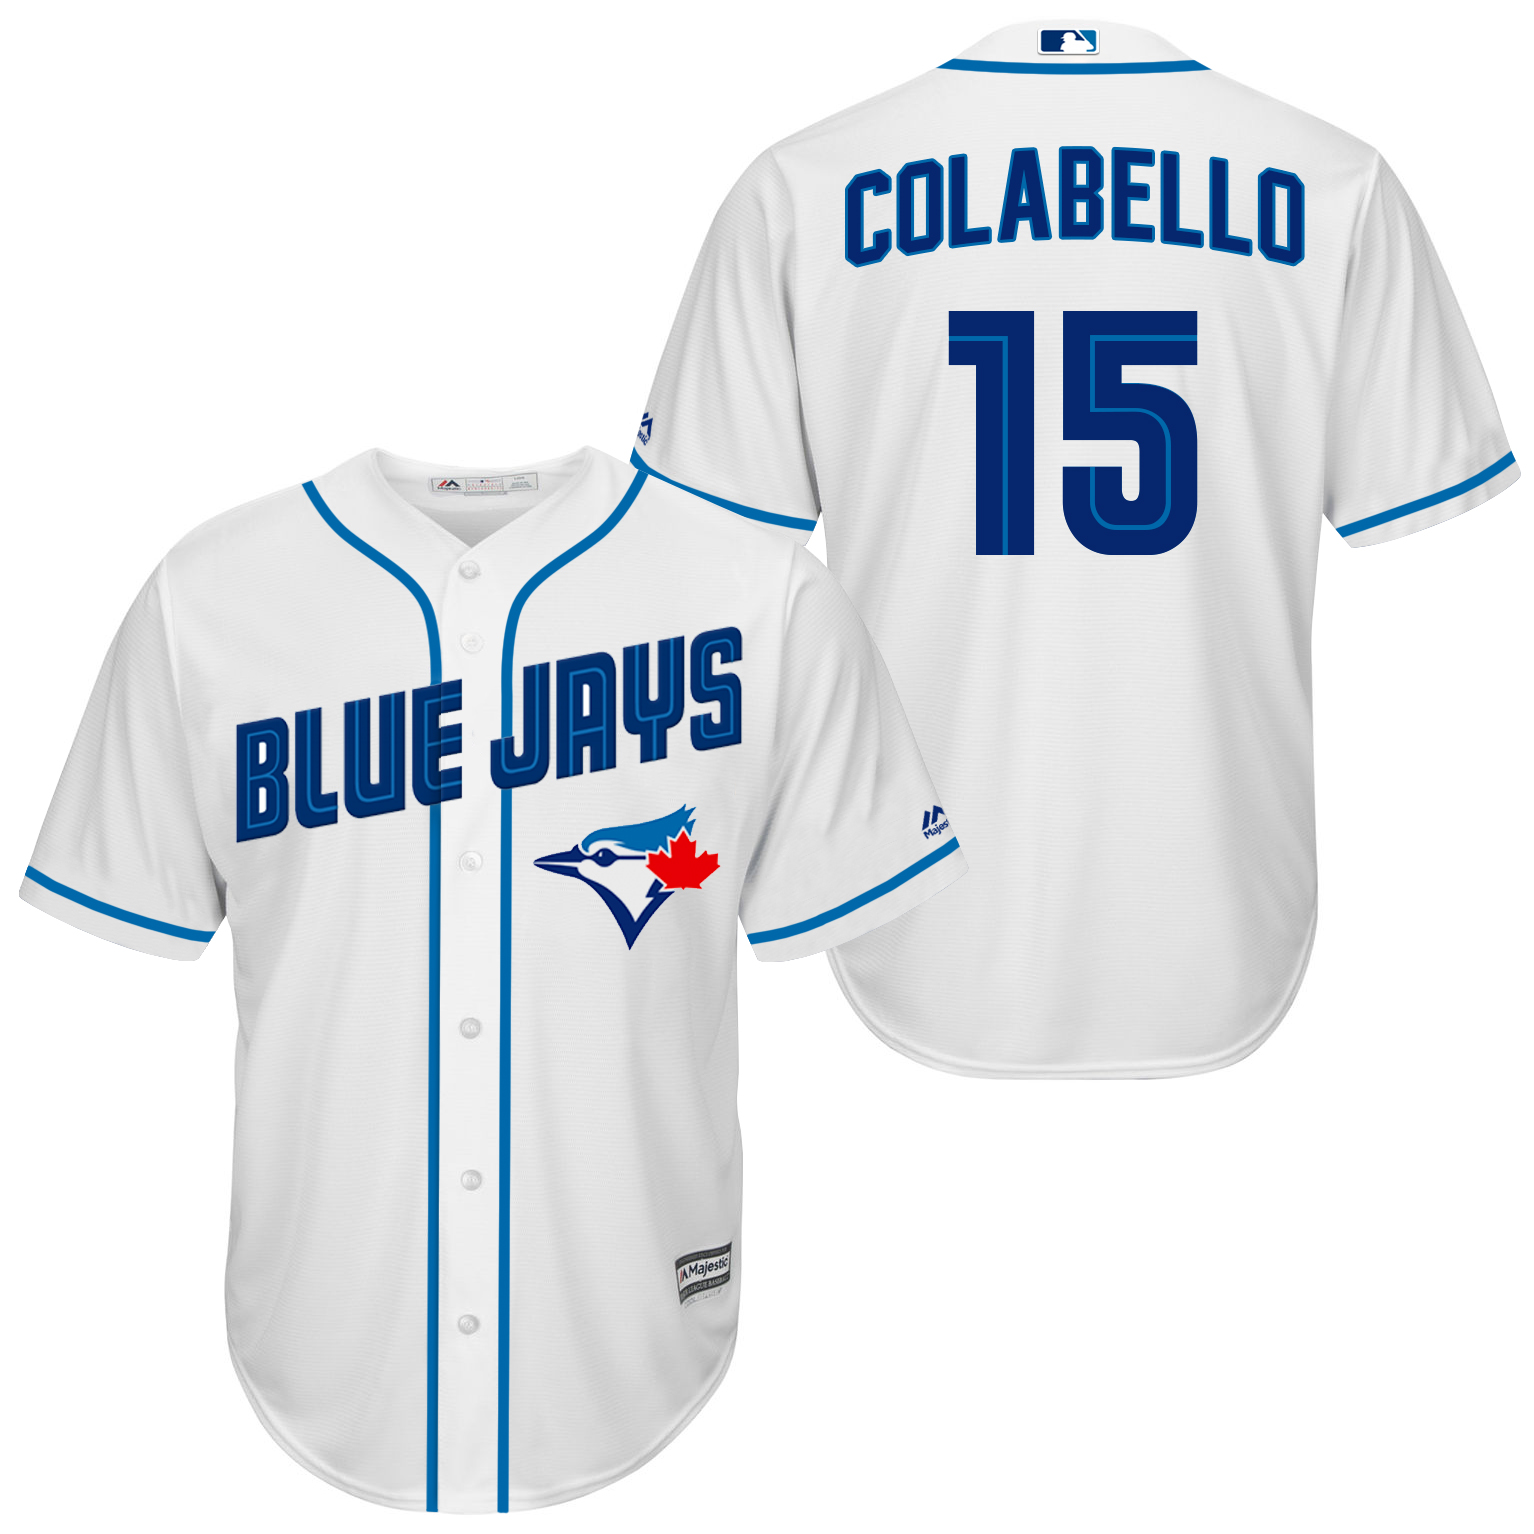 Blue Jays 15 Chris Colabello White New Cool Base Jersey